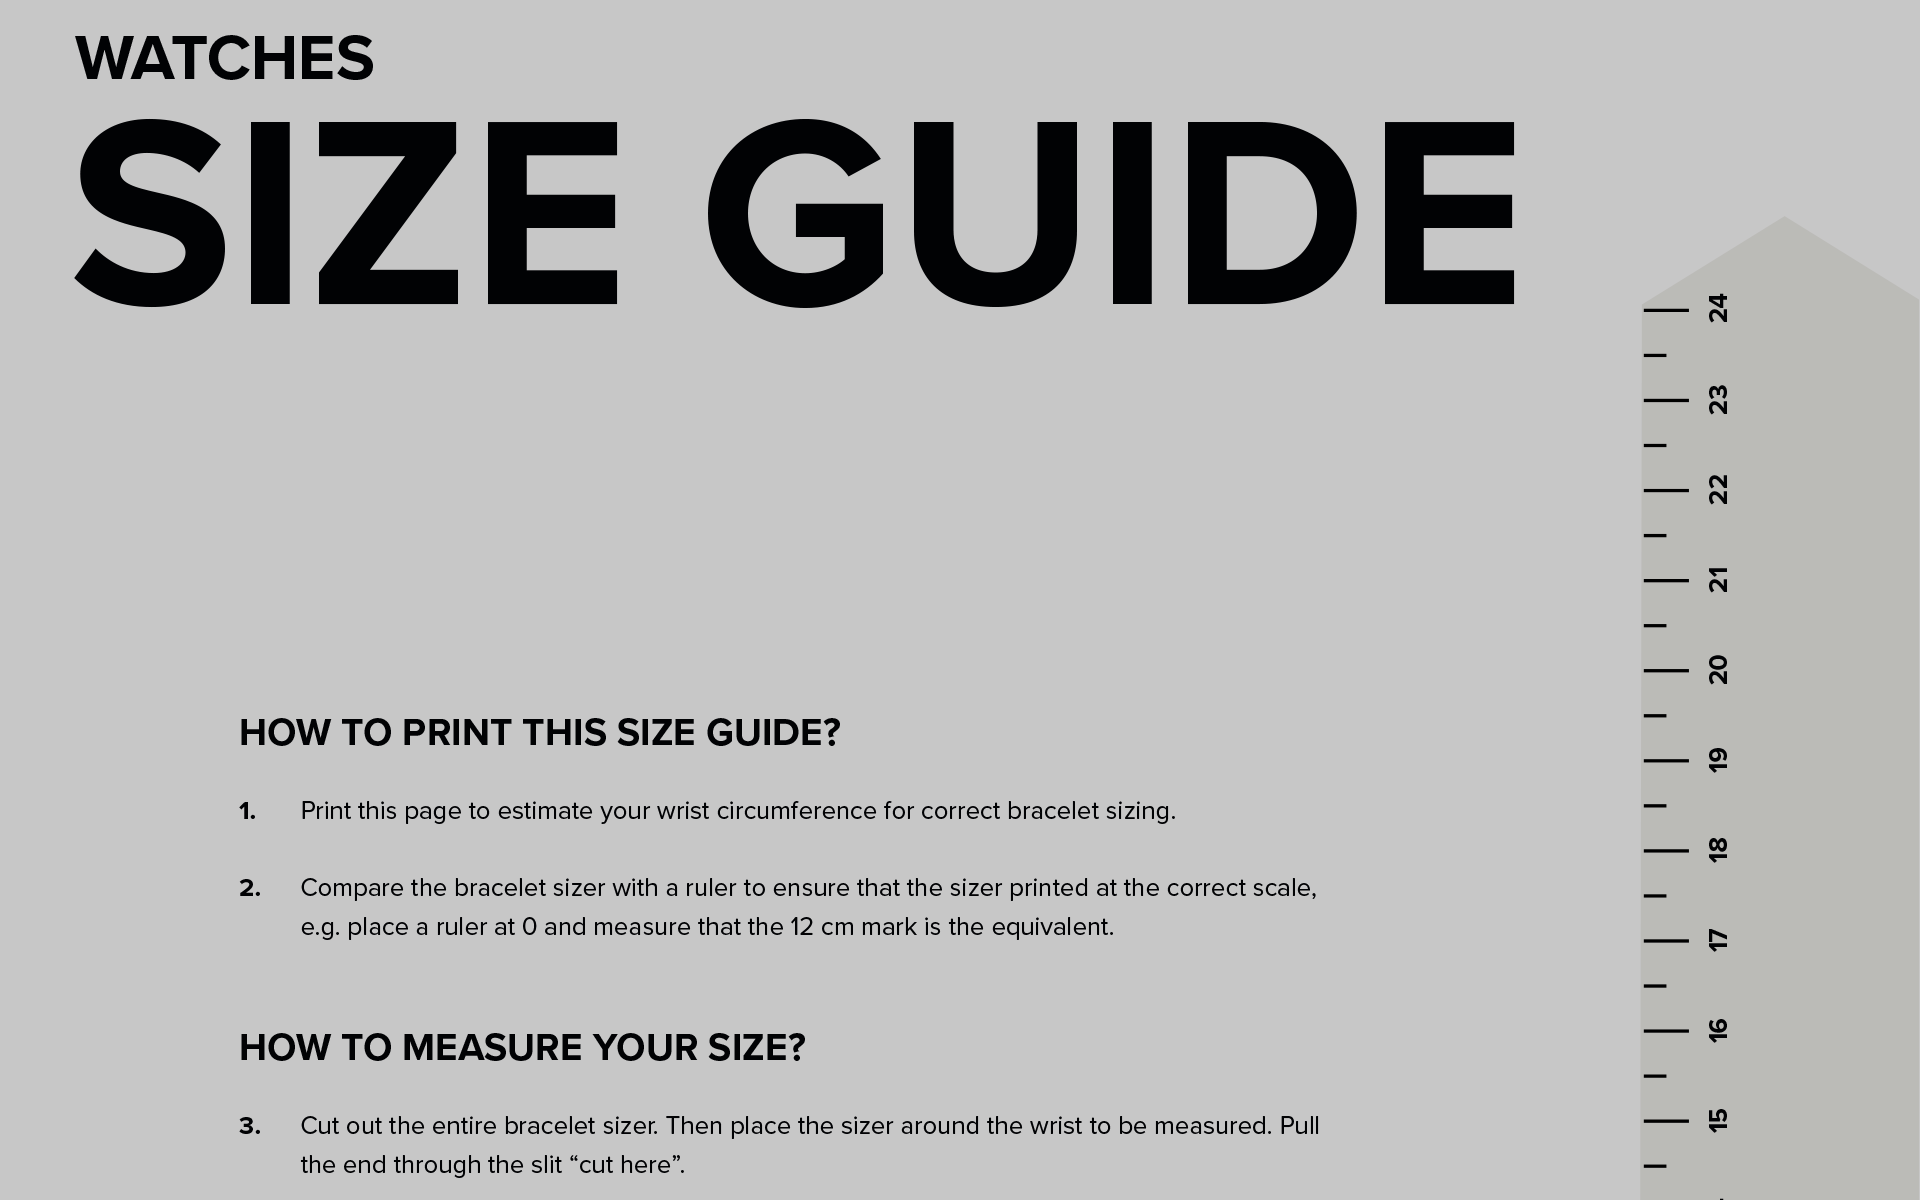 Watches-size-guide